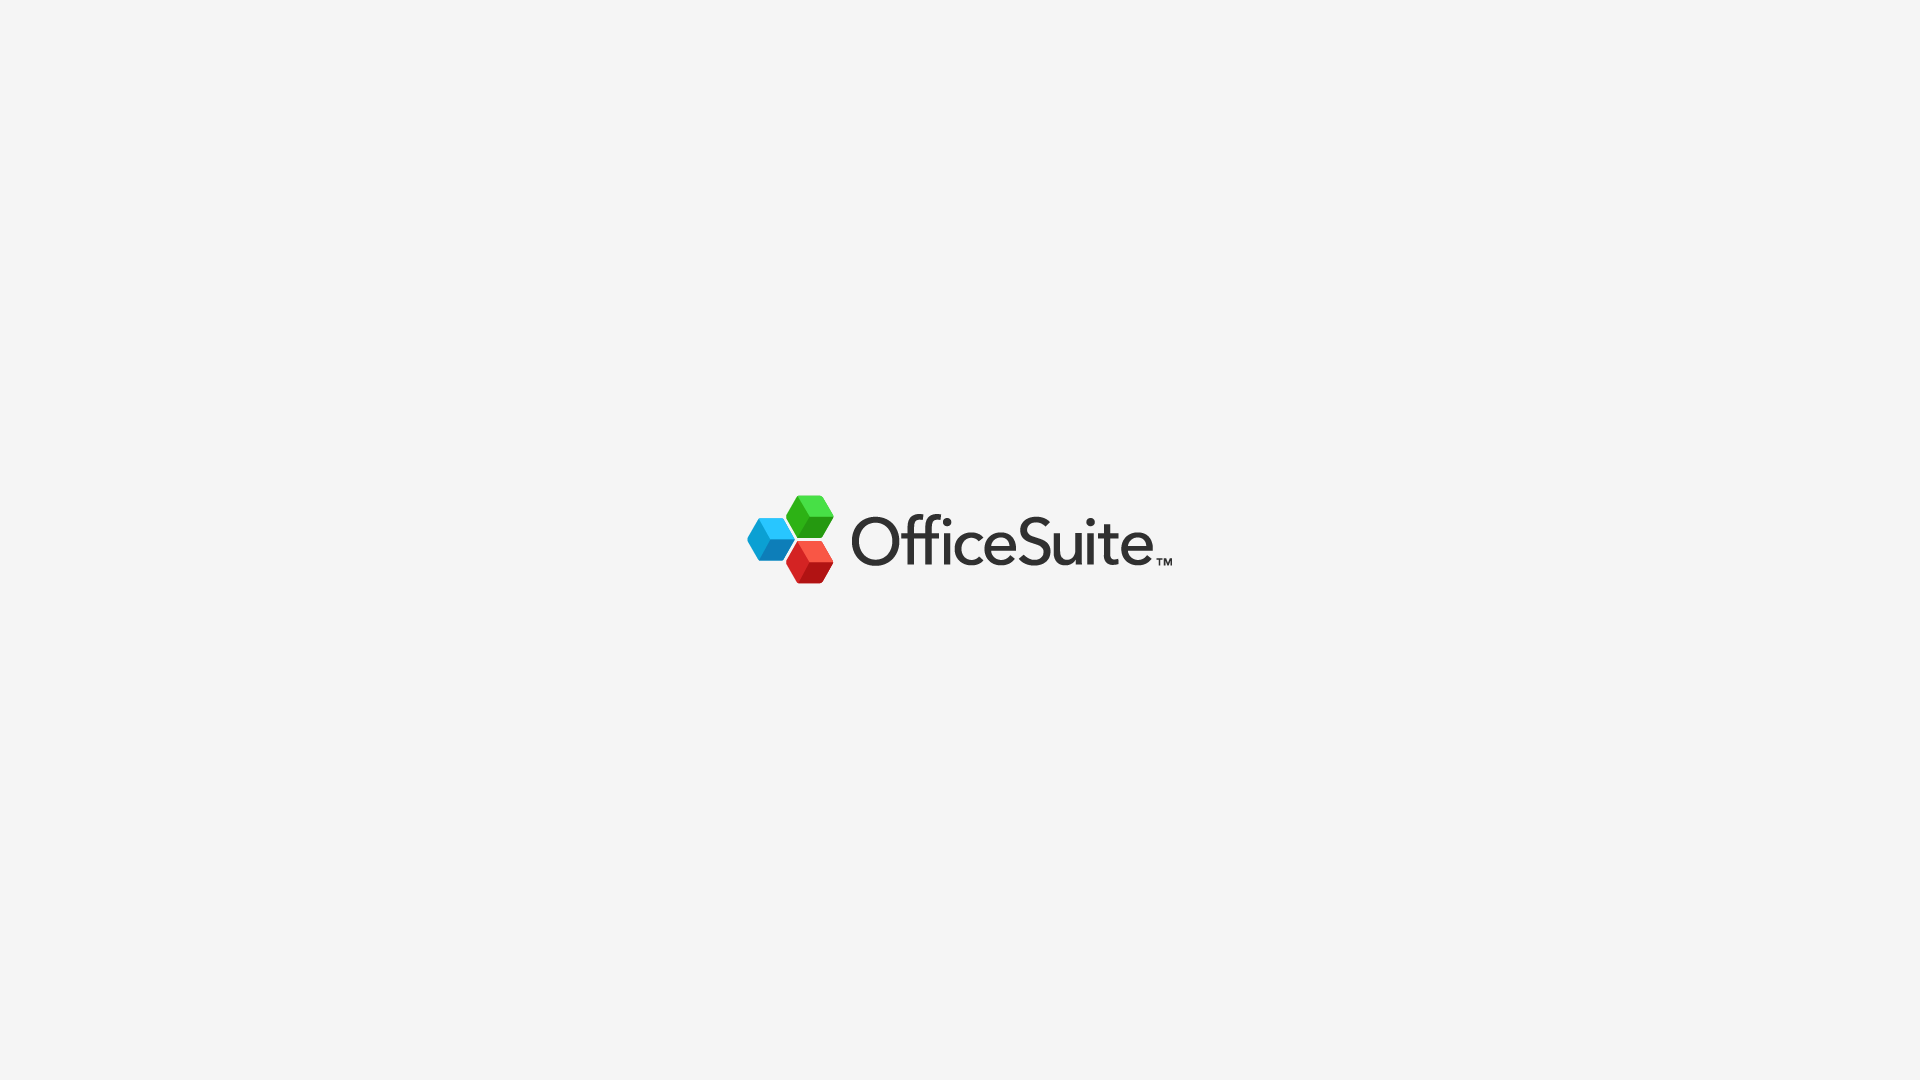 File:OfficeSuite 1.png